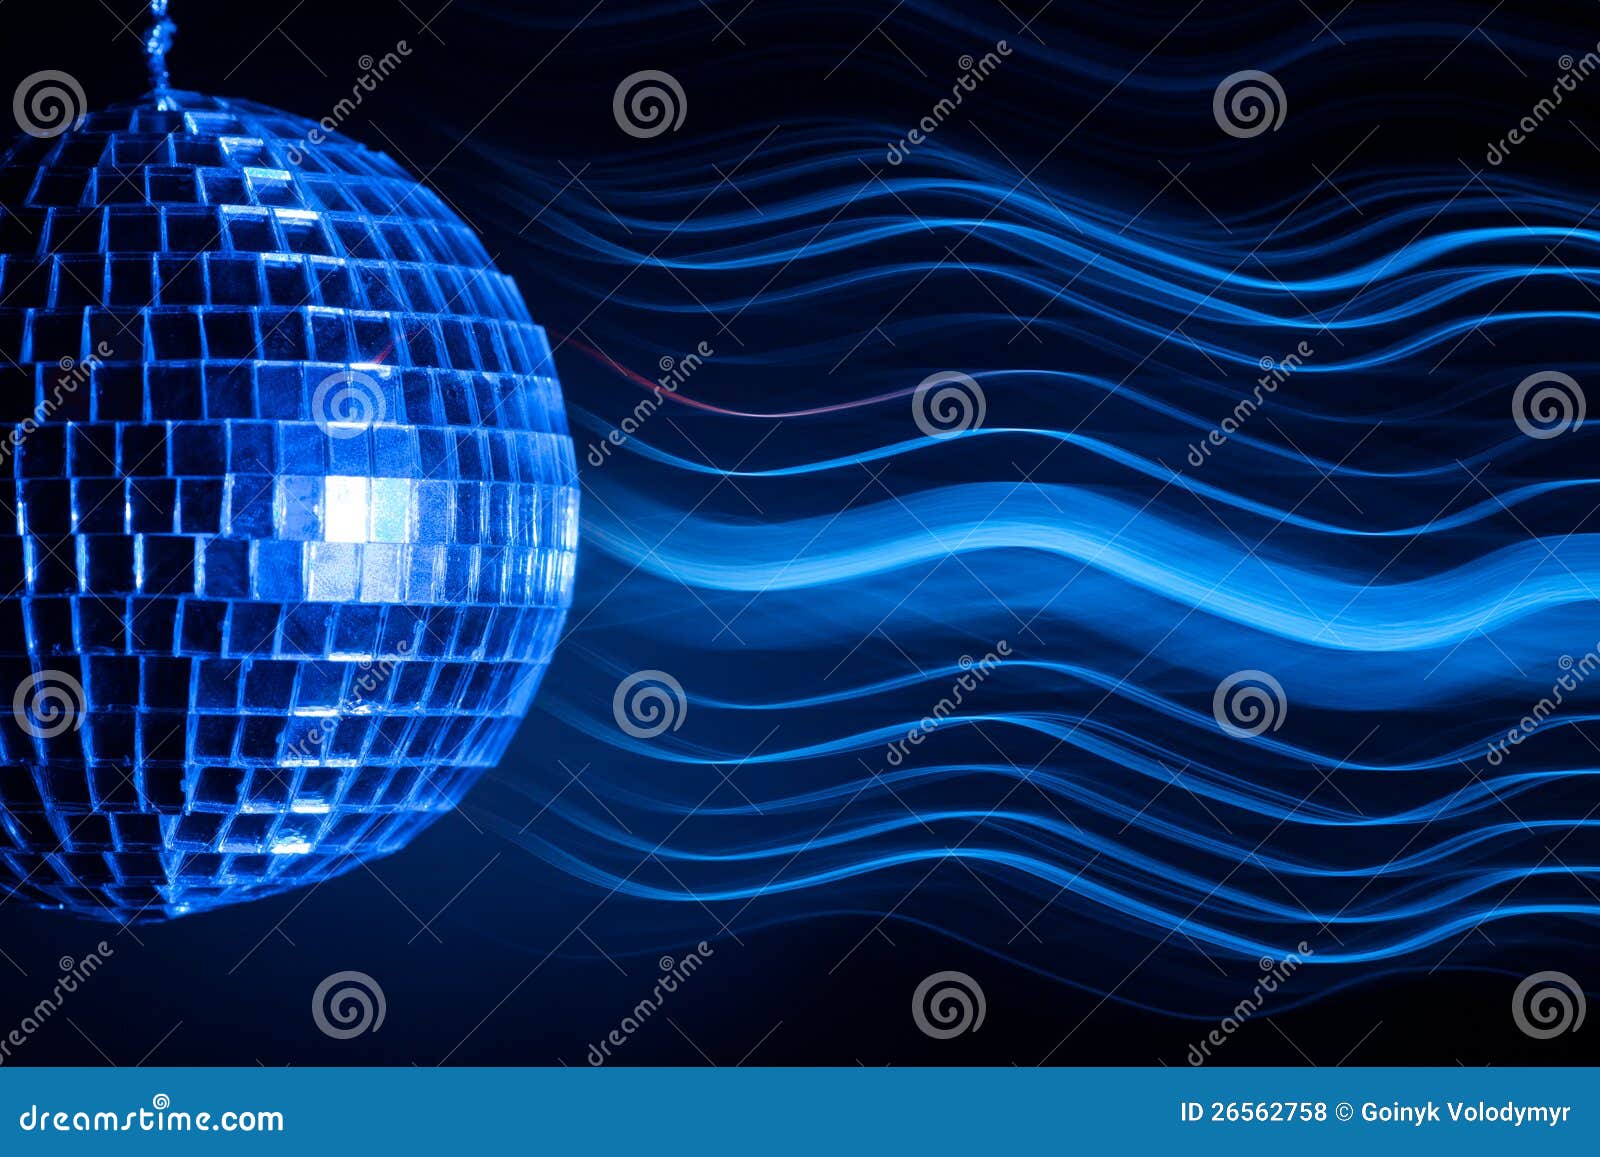 HD wallpaper artistic disco ball event nightlife party  social event   Wallpaper Flare